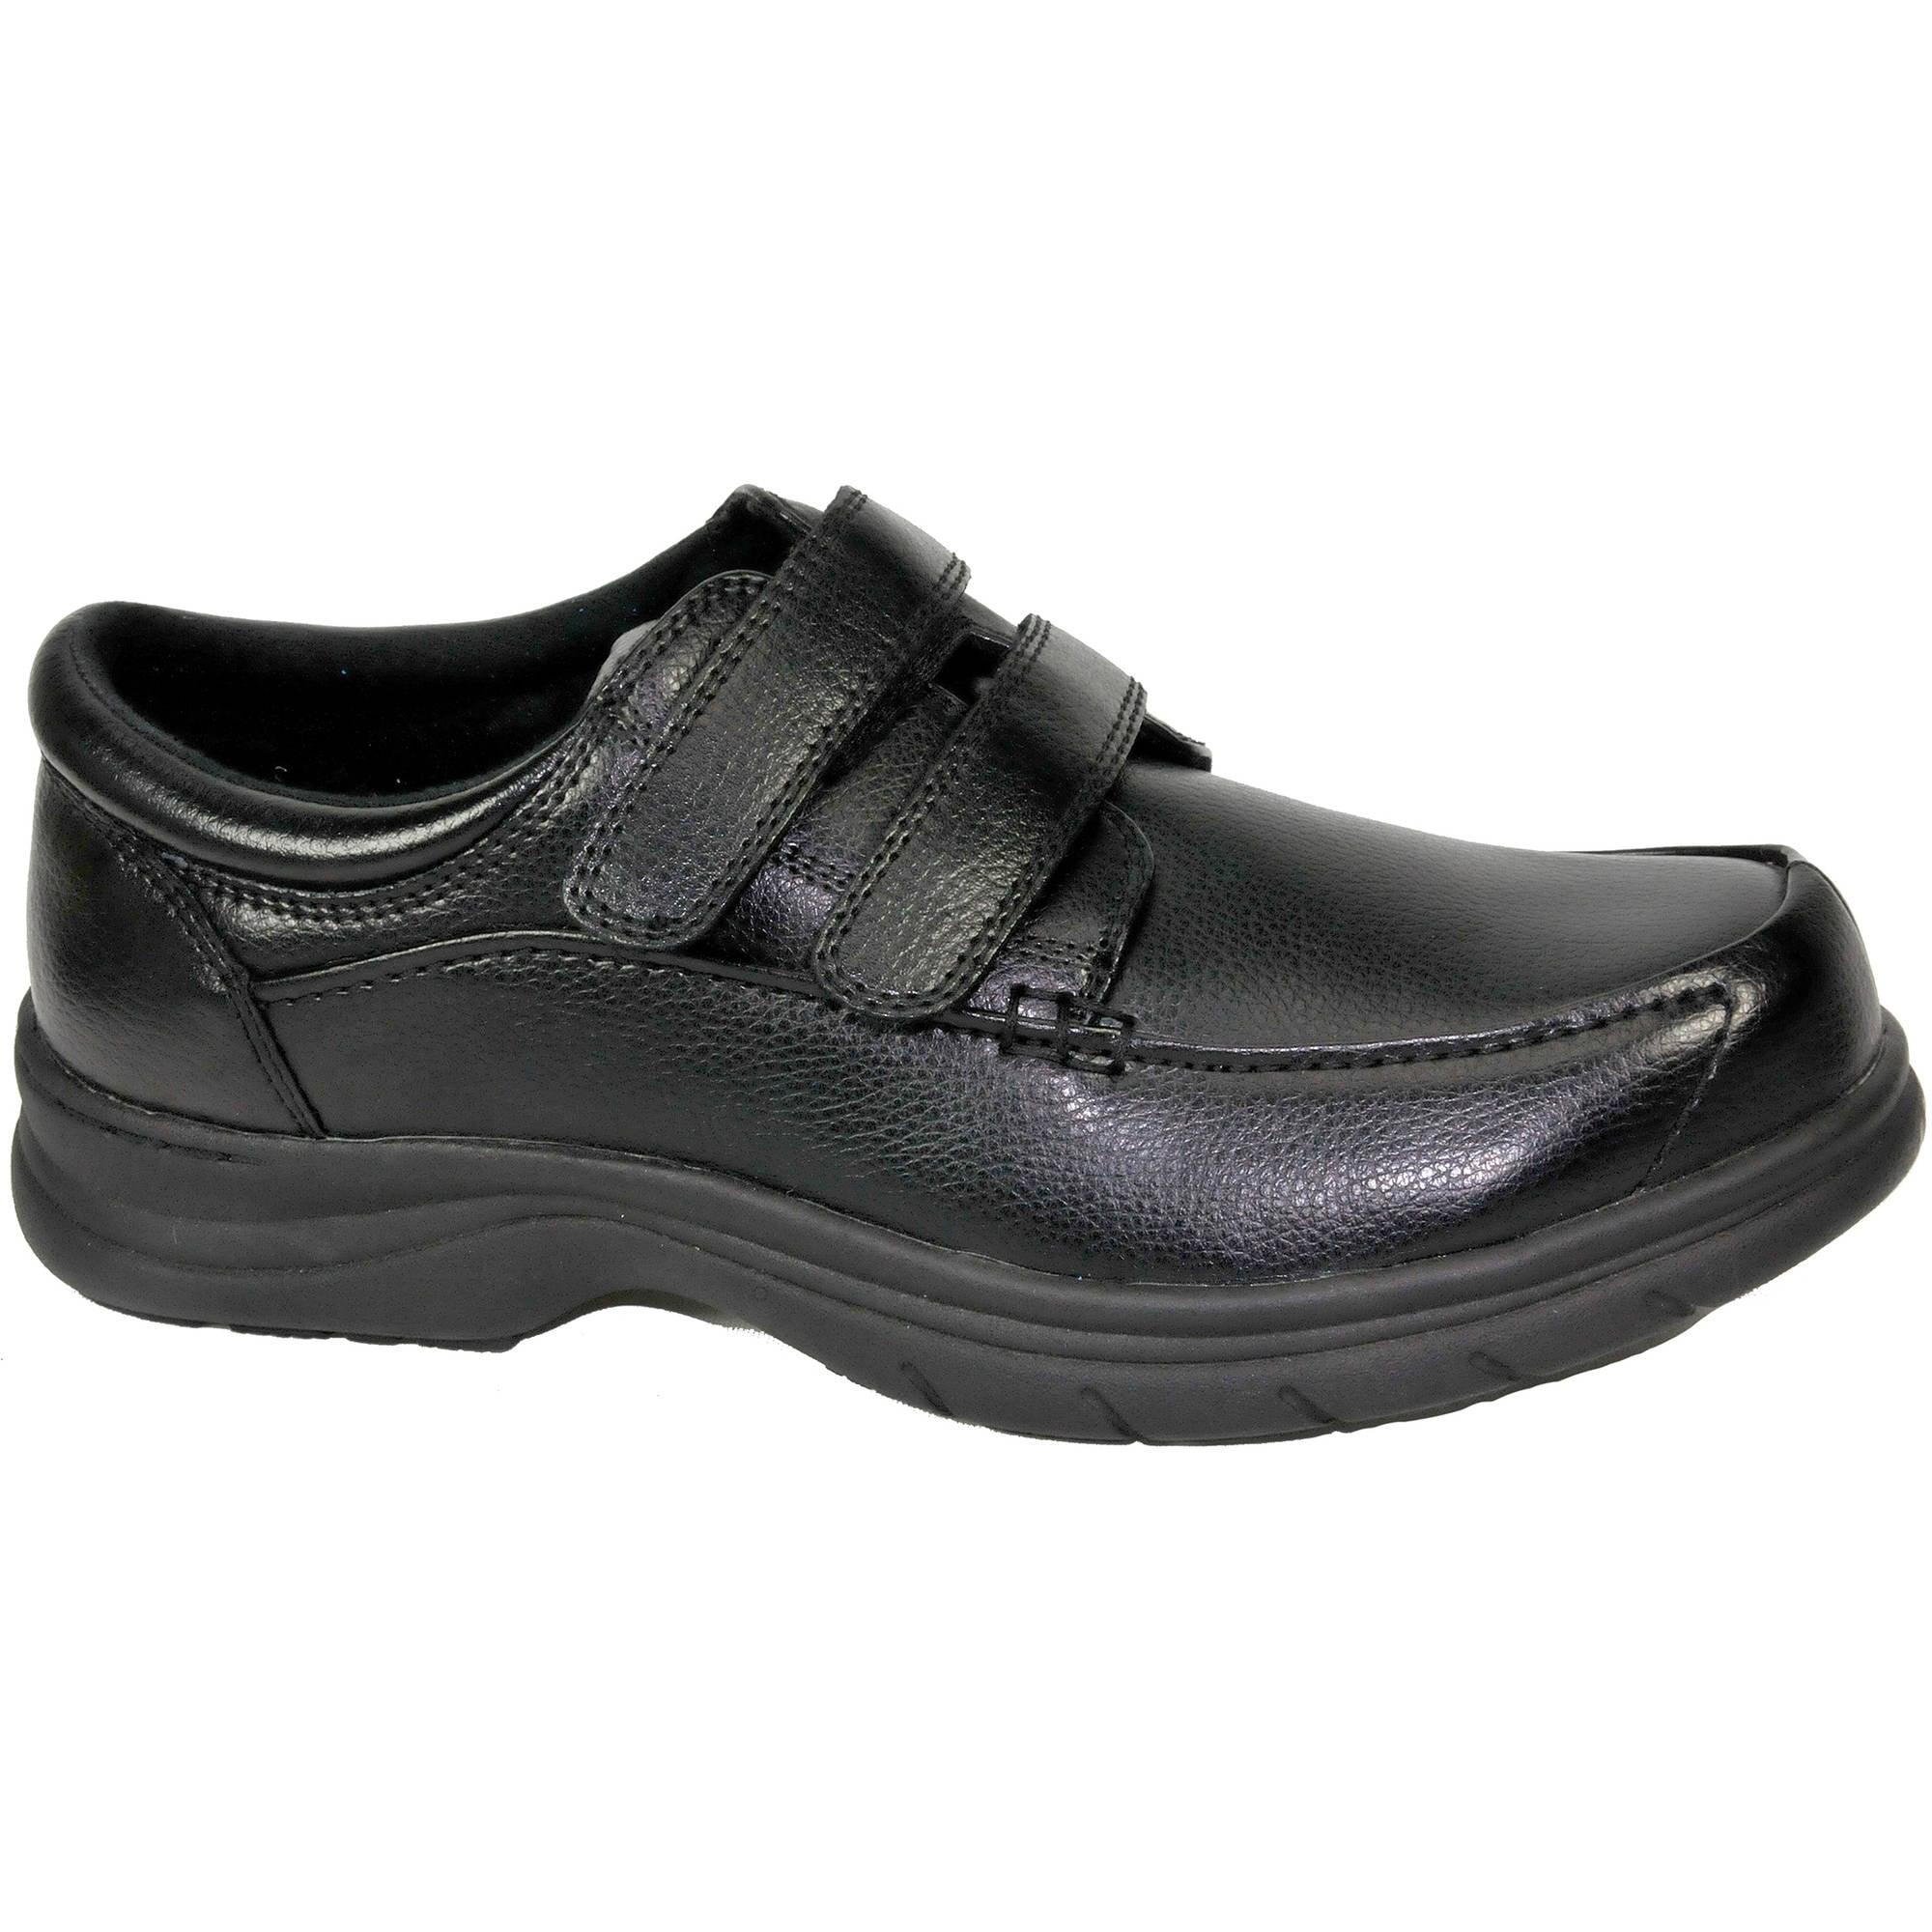 BRAND  NEW MEN'S DR SCHOLL'S BLACK CASUAL SLIP-ON SHOES with LEATHER UPPERS 